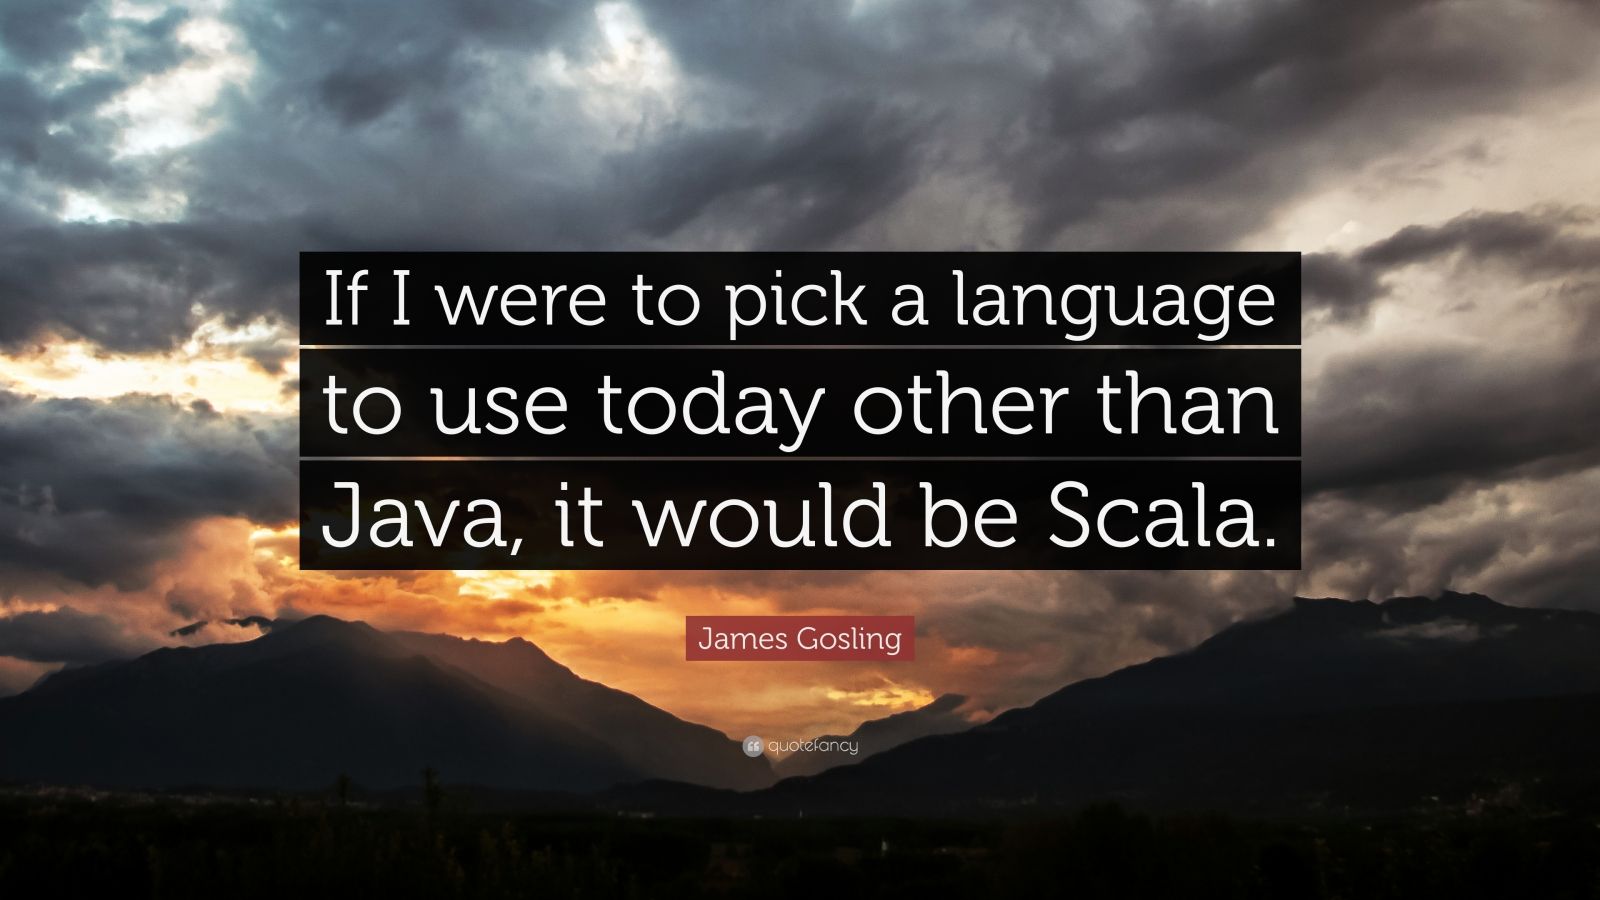 James Gosling Quote: “If I were to pick a language to use today other